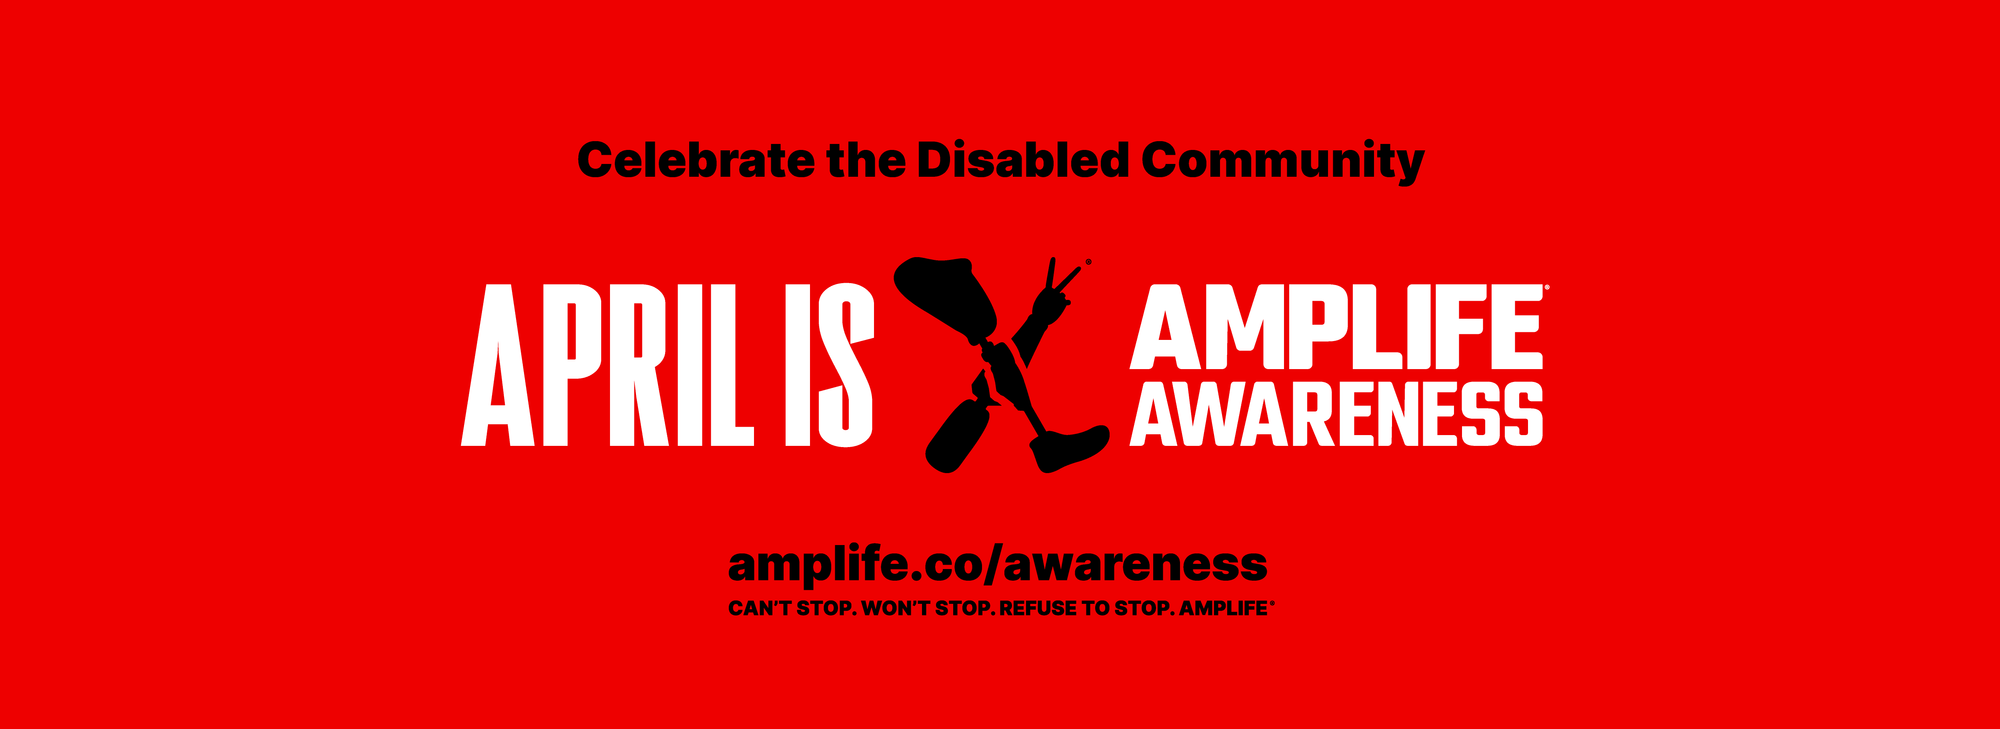 Amplife® Awareness logo. Celebrate the disabled community. April is Amplife Awareness. amplife.co. Can't stop. Won't stop. Refuse to stop.